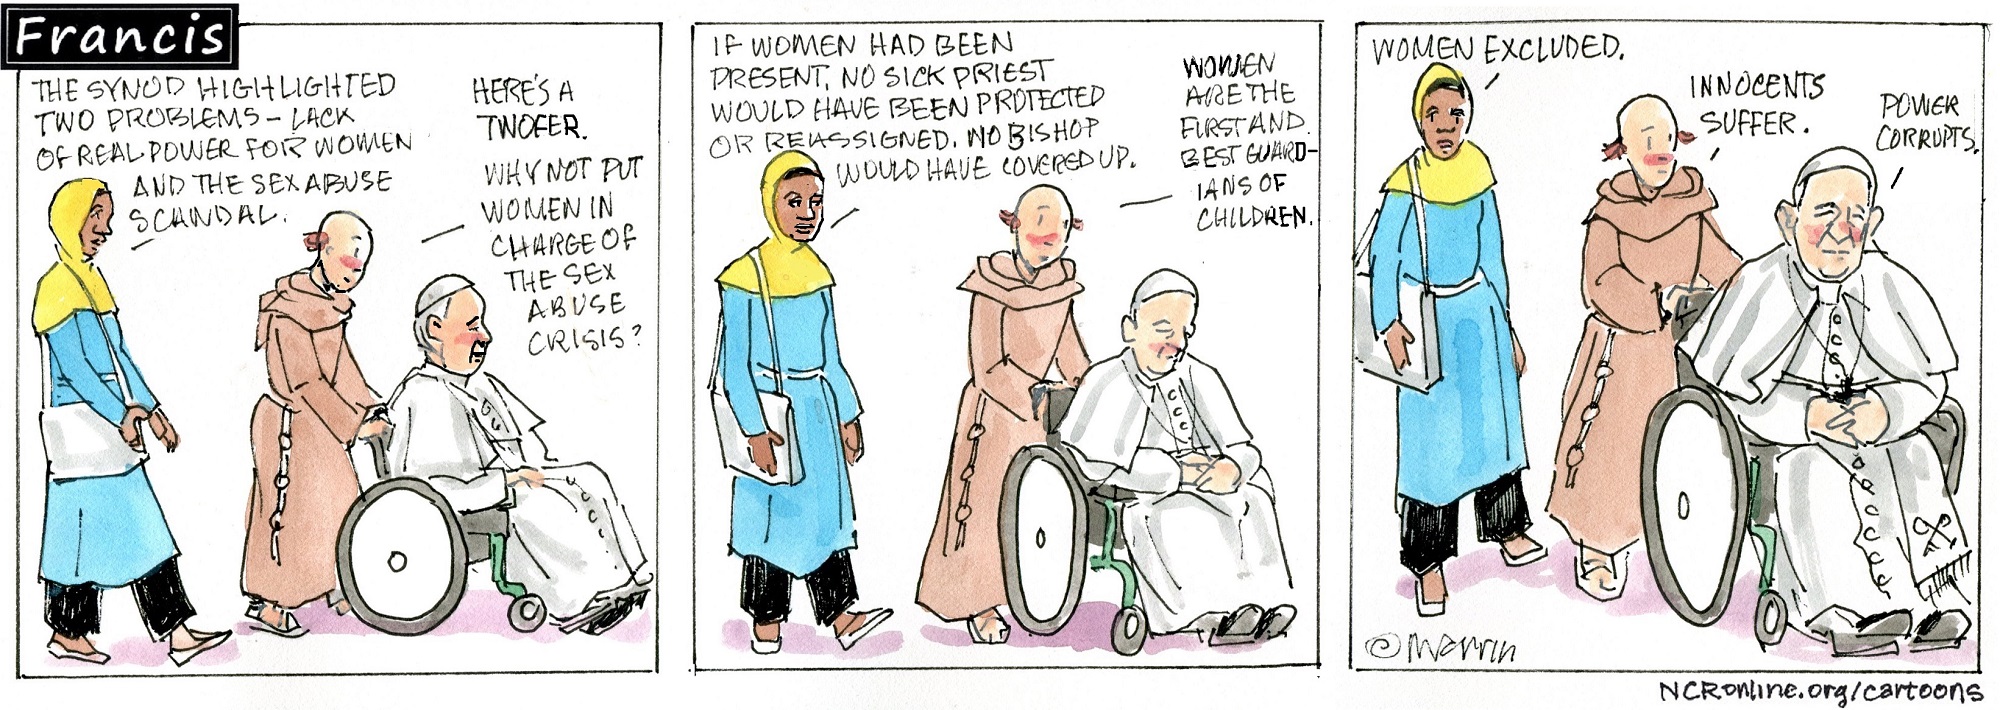 Francis, the comic strip: The synod highlighted two real problems, and Leo has an idea.